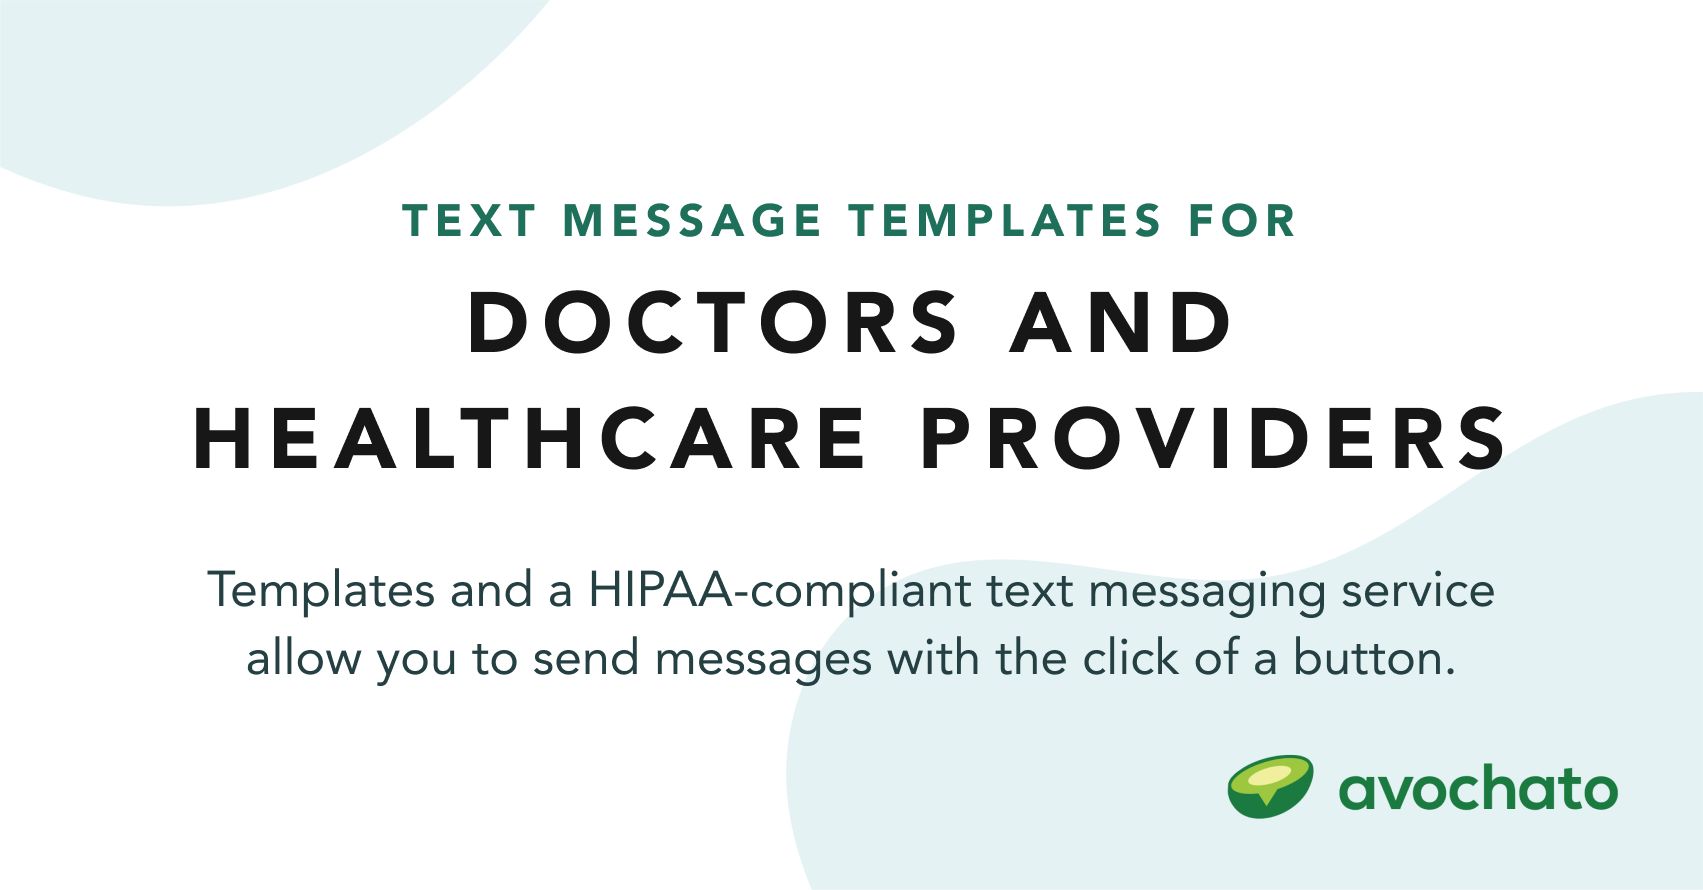 text-message-templates-for-doctors-and-healthcare-providers-avochato